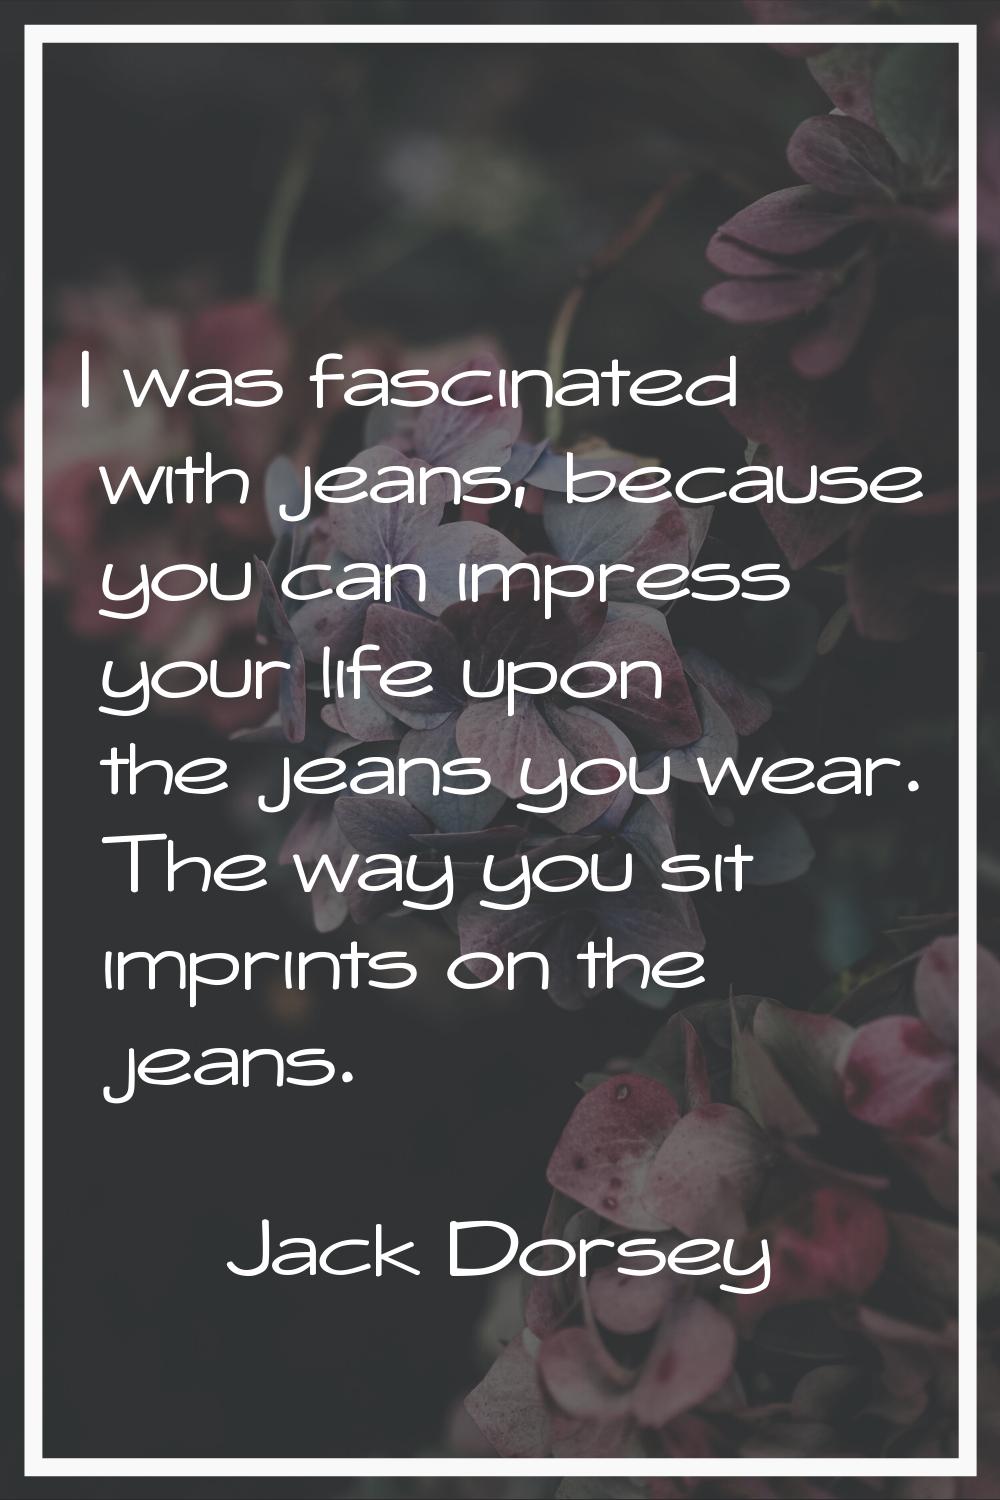 I was fascinated with jeans, because you can impress your life upon the jeans you wear. The way you